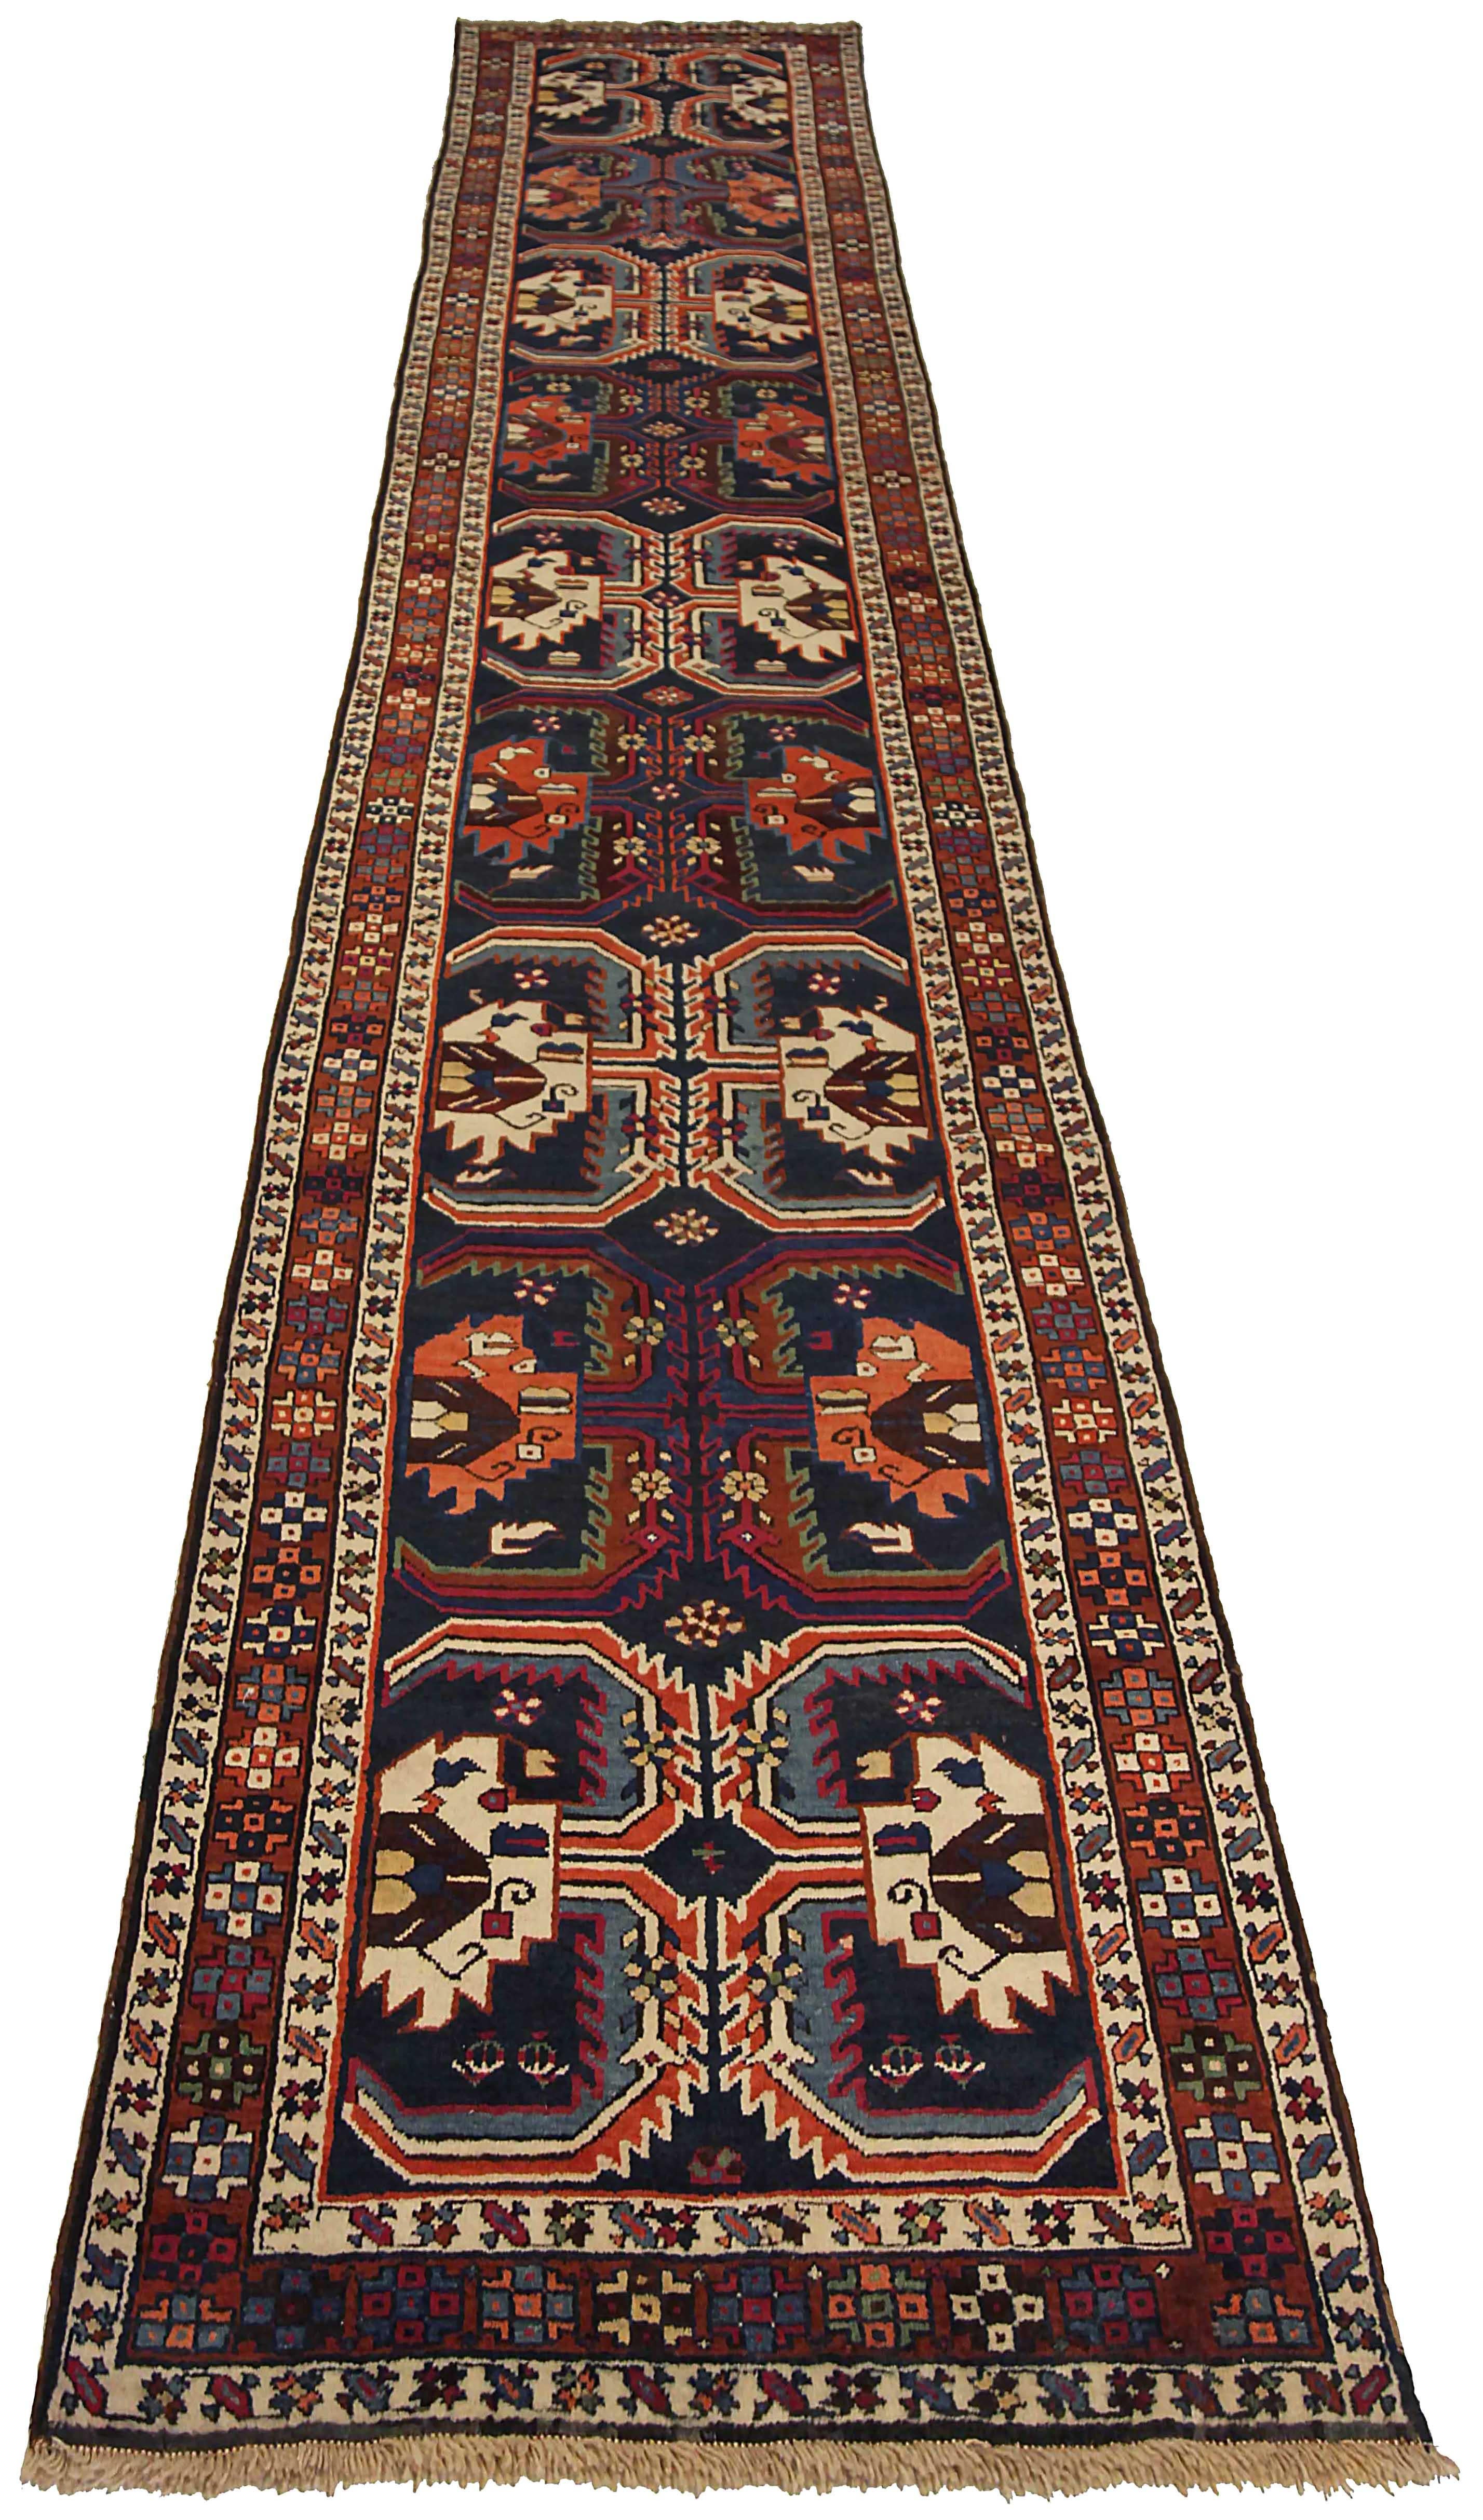 Antique Russian runner rug handwoven from the finest sheep’s wool. It’s colored with all-natural vegetable dyes that are safe for humans and pets. It’s a traditional Karebagh design handwoven by expert artisans. It’s a lovely runner rug that can be